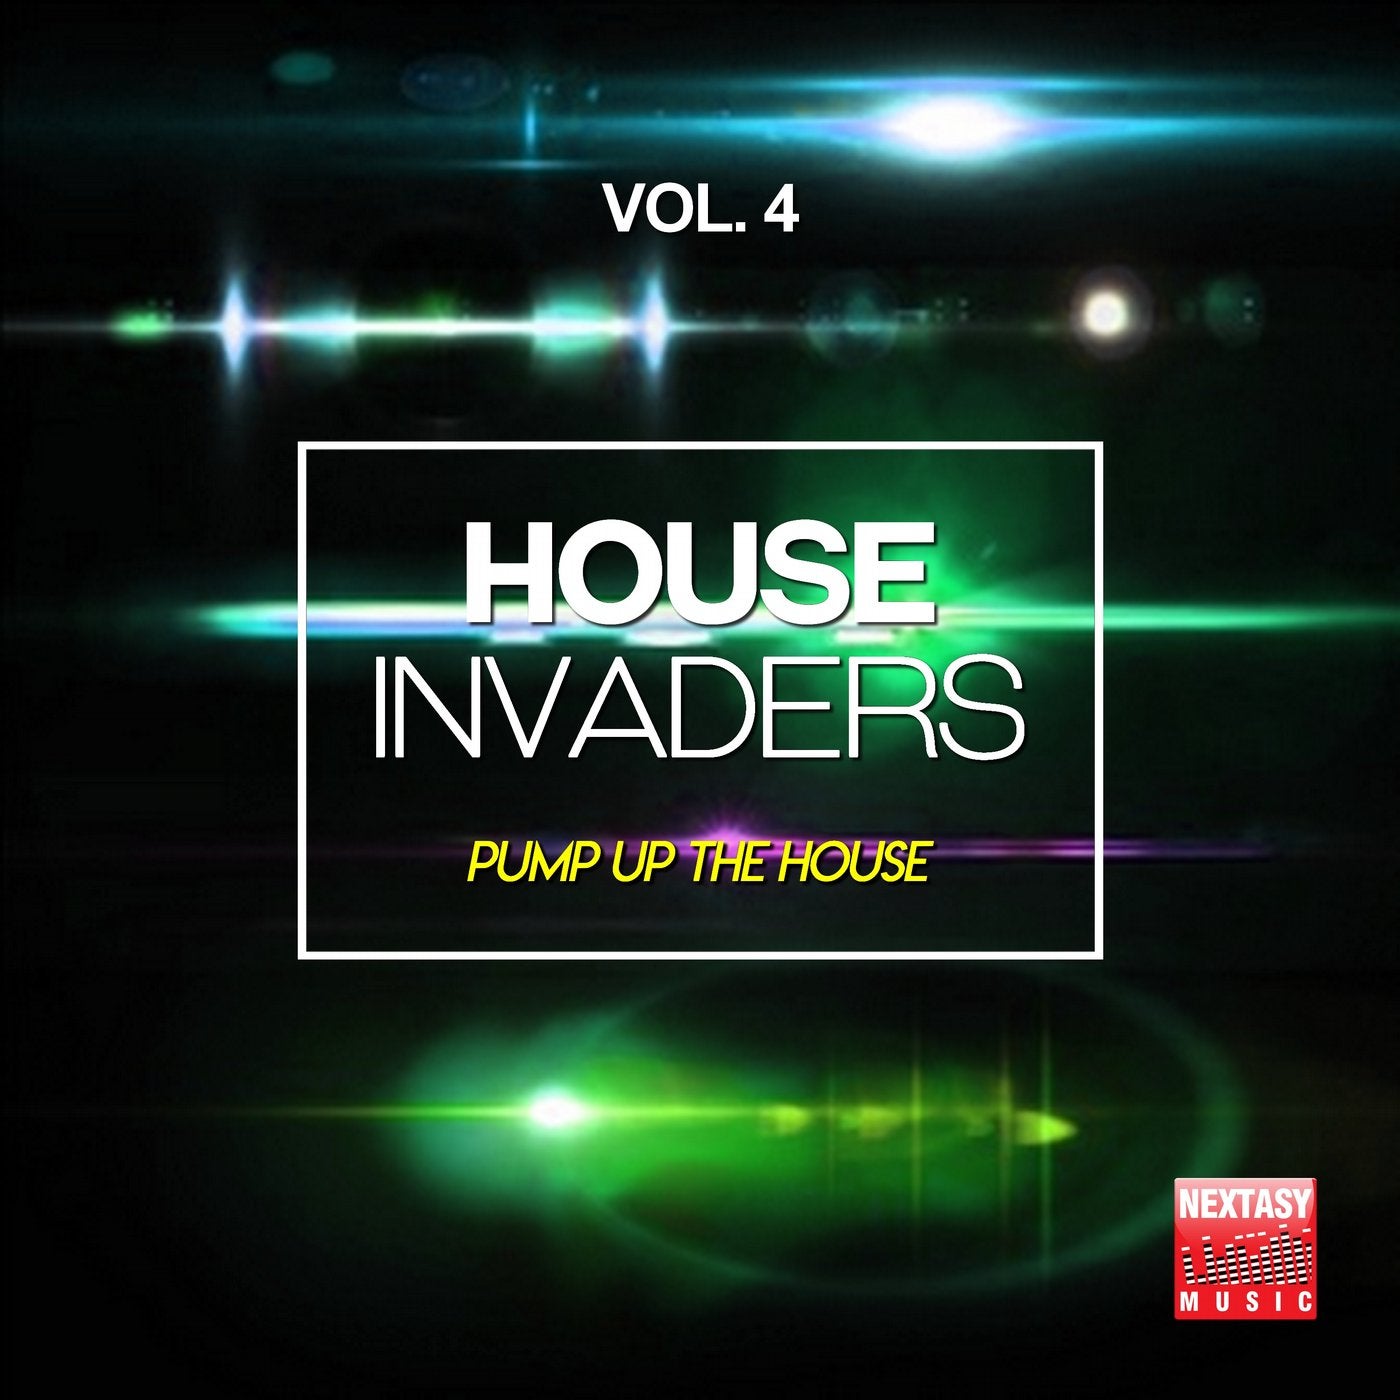 House Invaders, Vol. 4 (Pump Up The House)